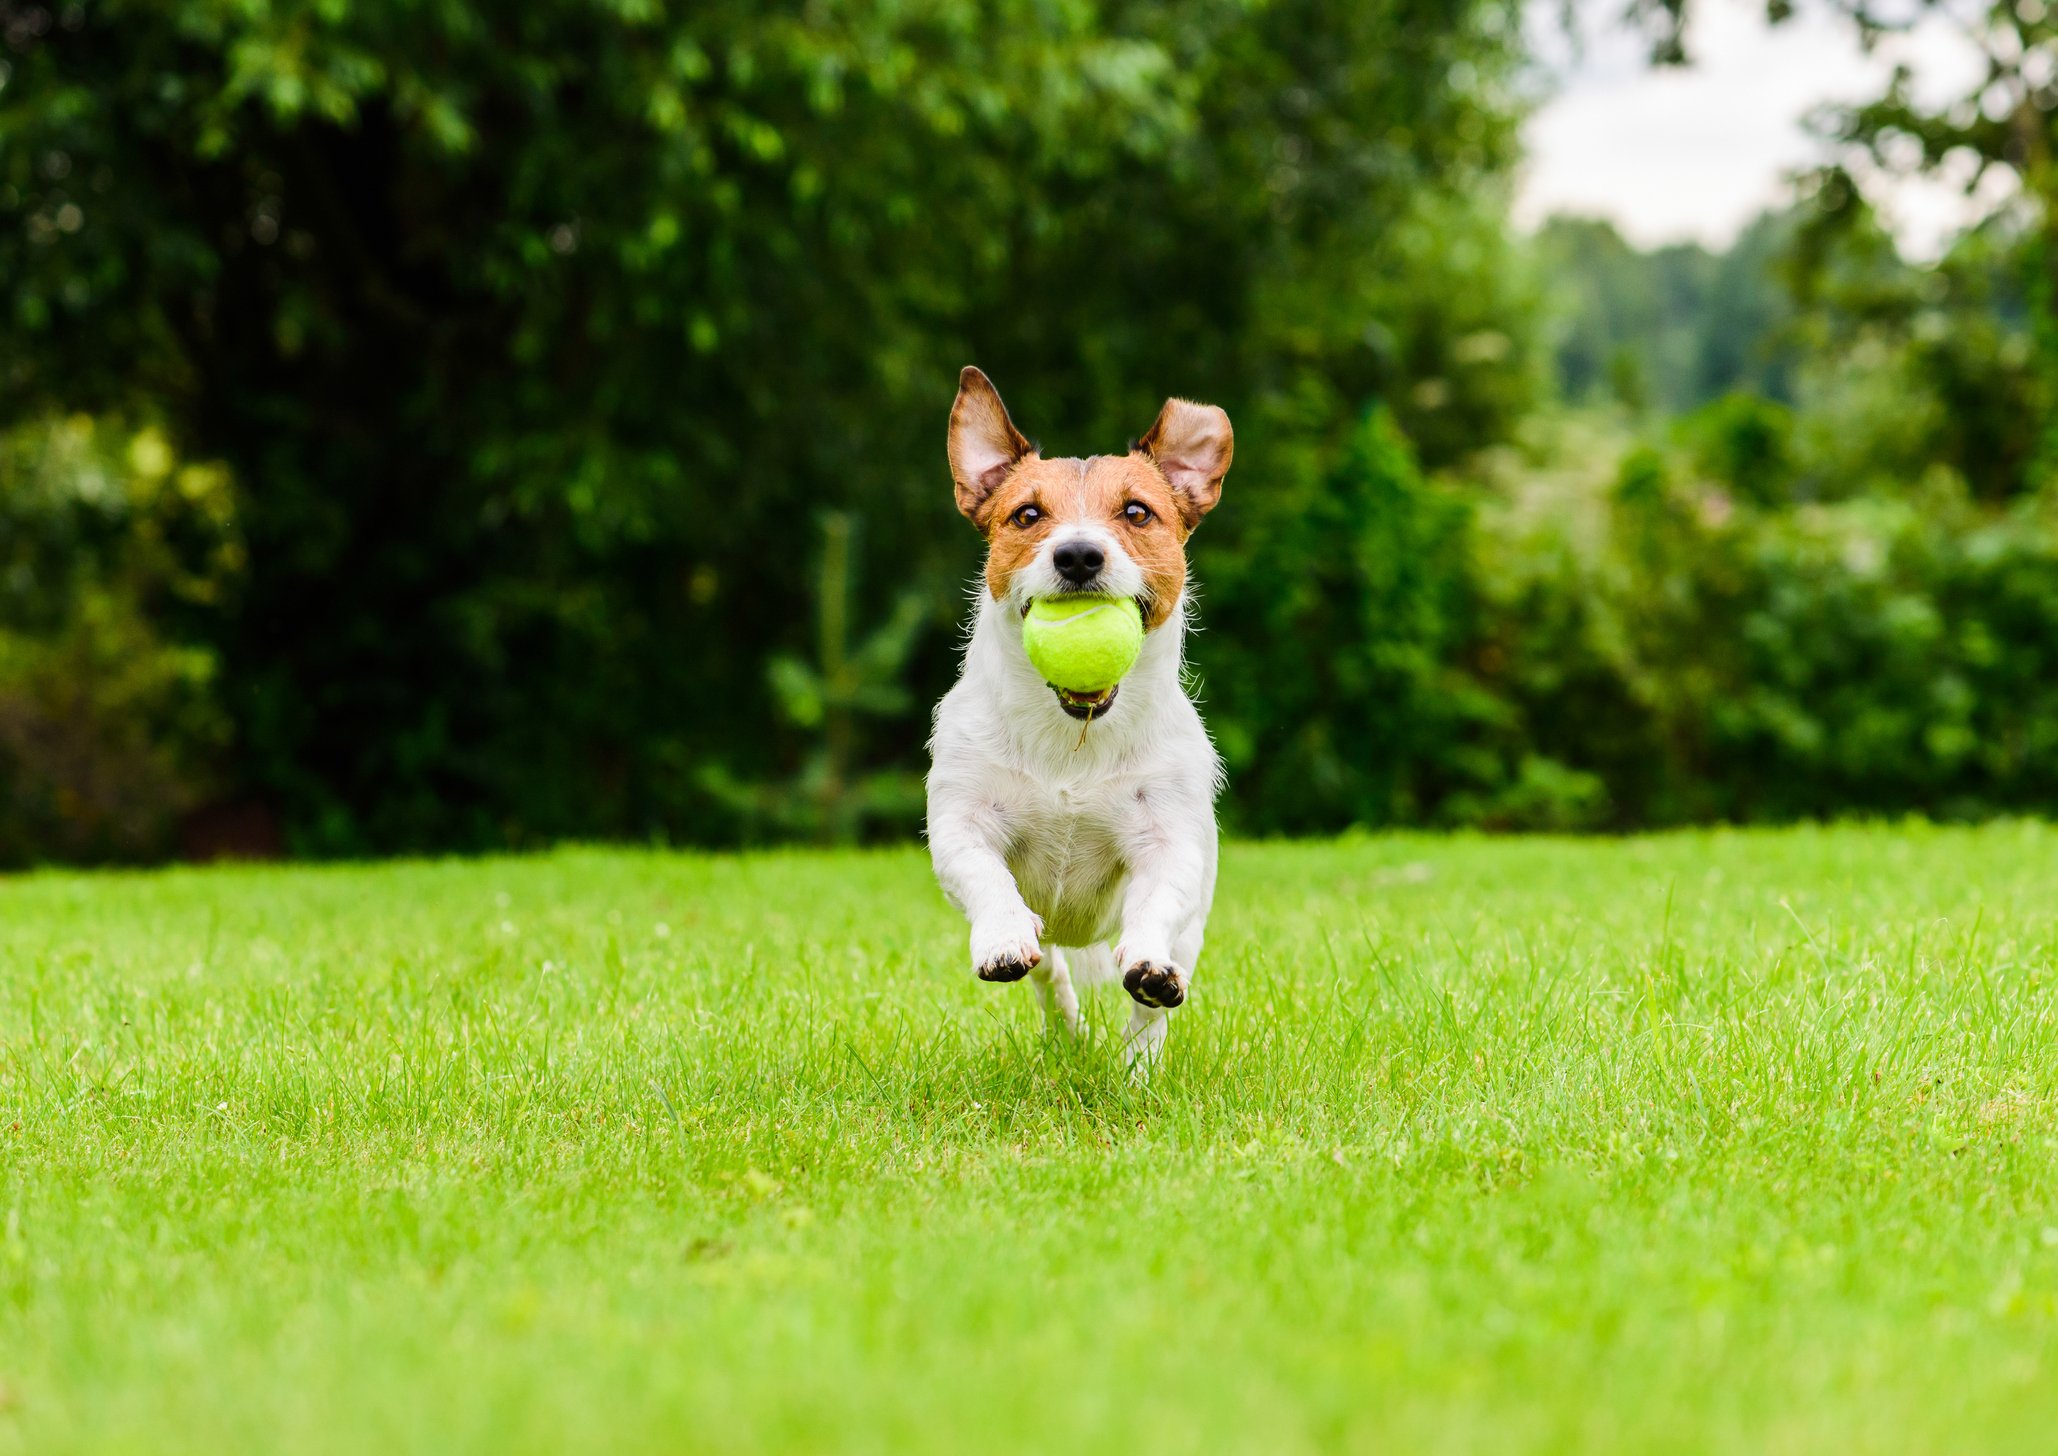 Dog running with ball on grass